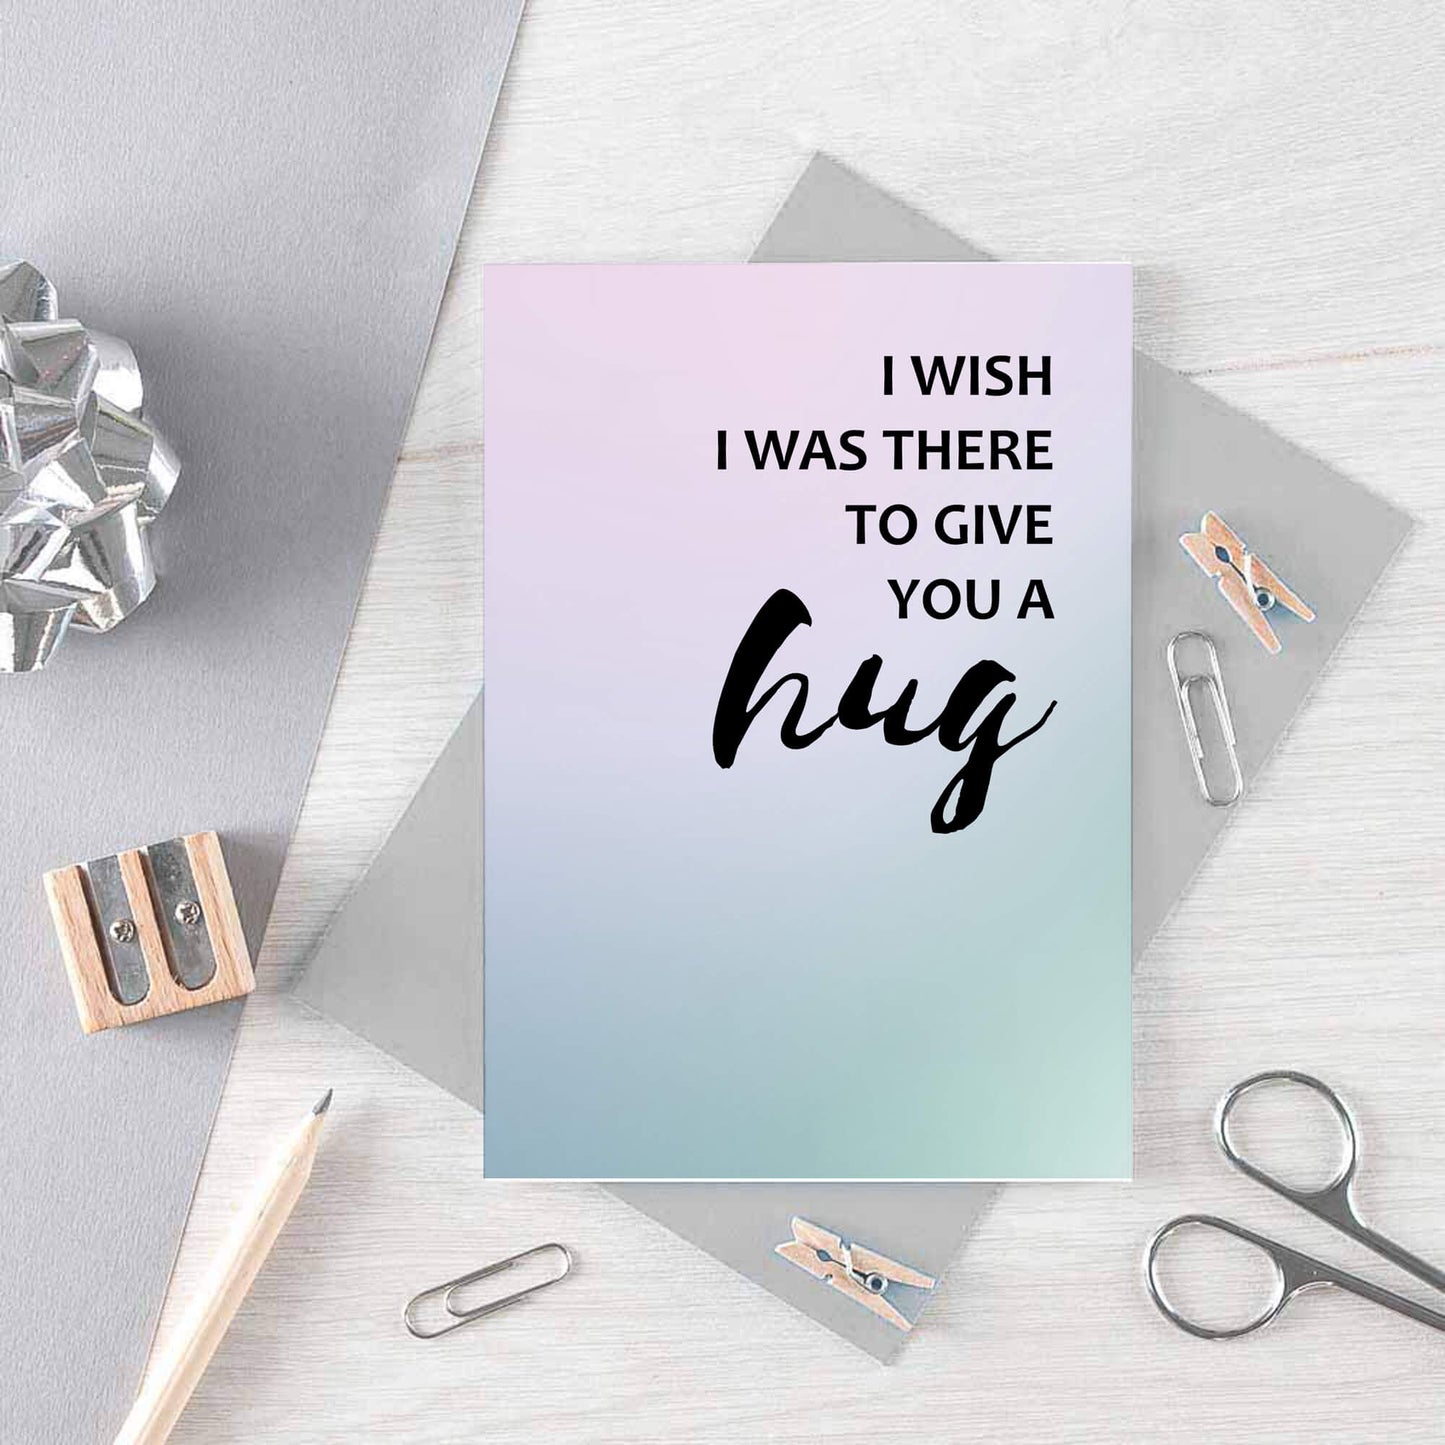 Send A Hug Card by SixElevenCreations. Reads I wish I was there to give you a hug. Product Code SE3033A6